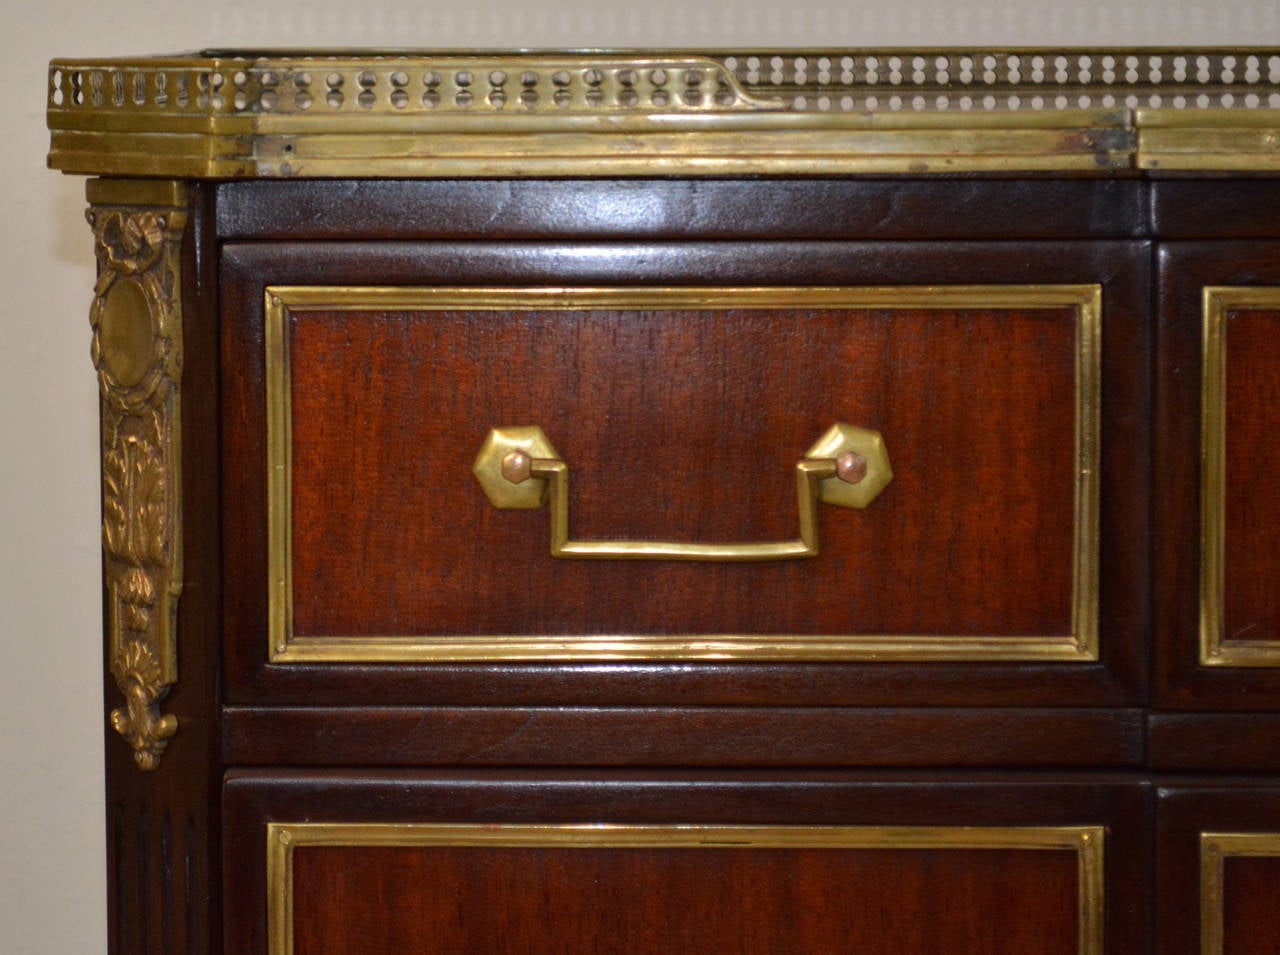 A lovely three drawer commode made of light and dark stained mahogany with brass mounts in the style of Maison Jansen's early 20th century work. Drawers feature brass trim, key escutcheons and classic drop handles with hexagonal backplates. A white